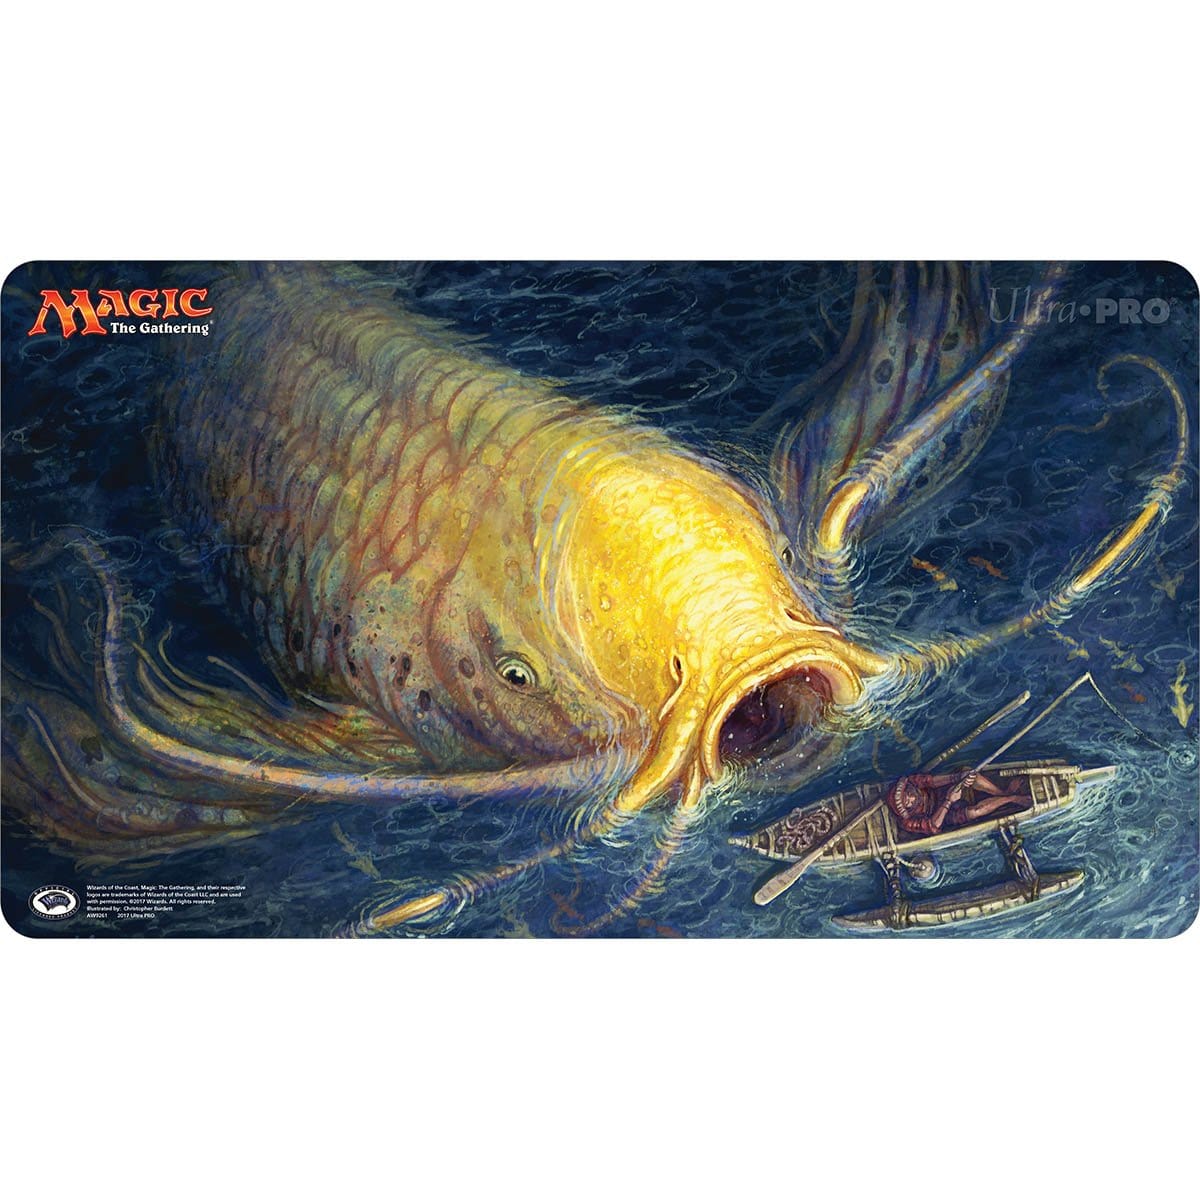 Ancient Carp Playmat - Playmat - Original Magic Art - Accessories for Magic the Gathering and other card games